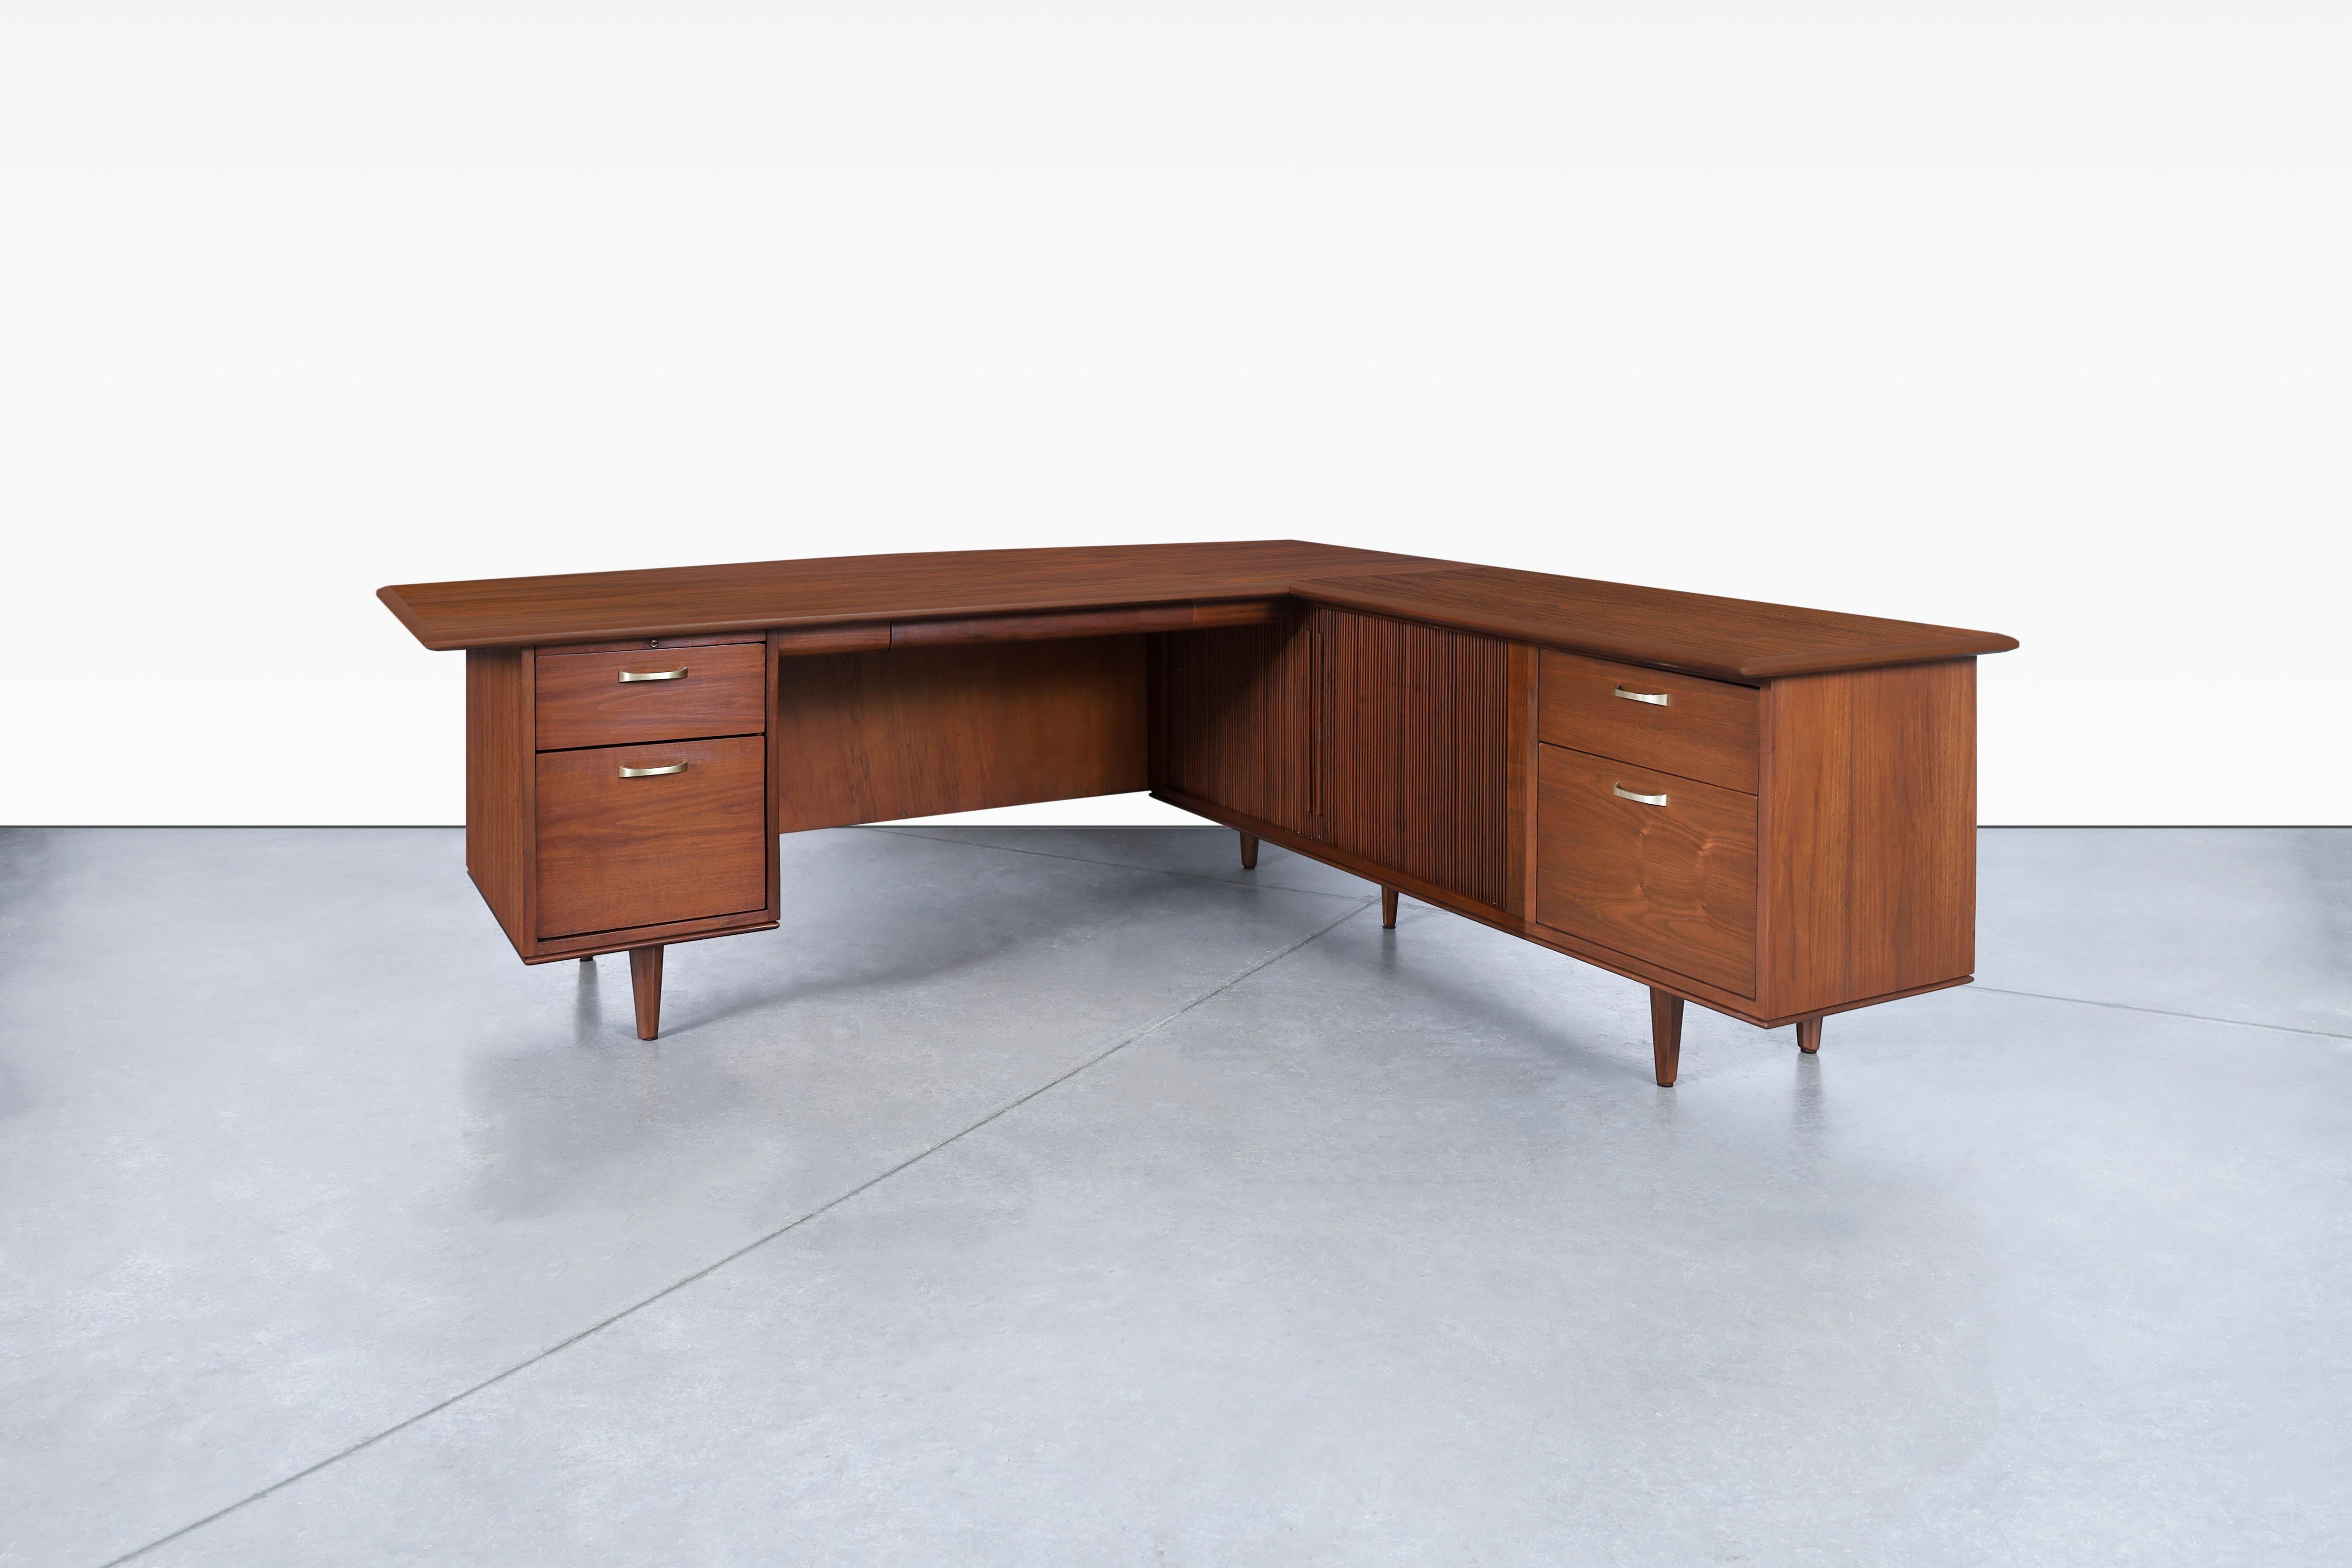 Mid-century L-shaped walnut desk manufactured by Monteverdi Young in the United States, circa 1960s. The boomerang shape adds a unique touch, seamlessly blending style and functionality. The front design is marvelous, featuring two sliding tambour